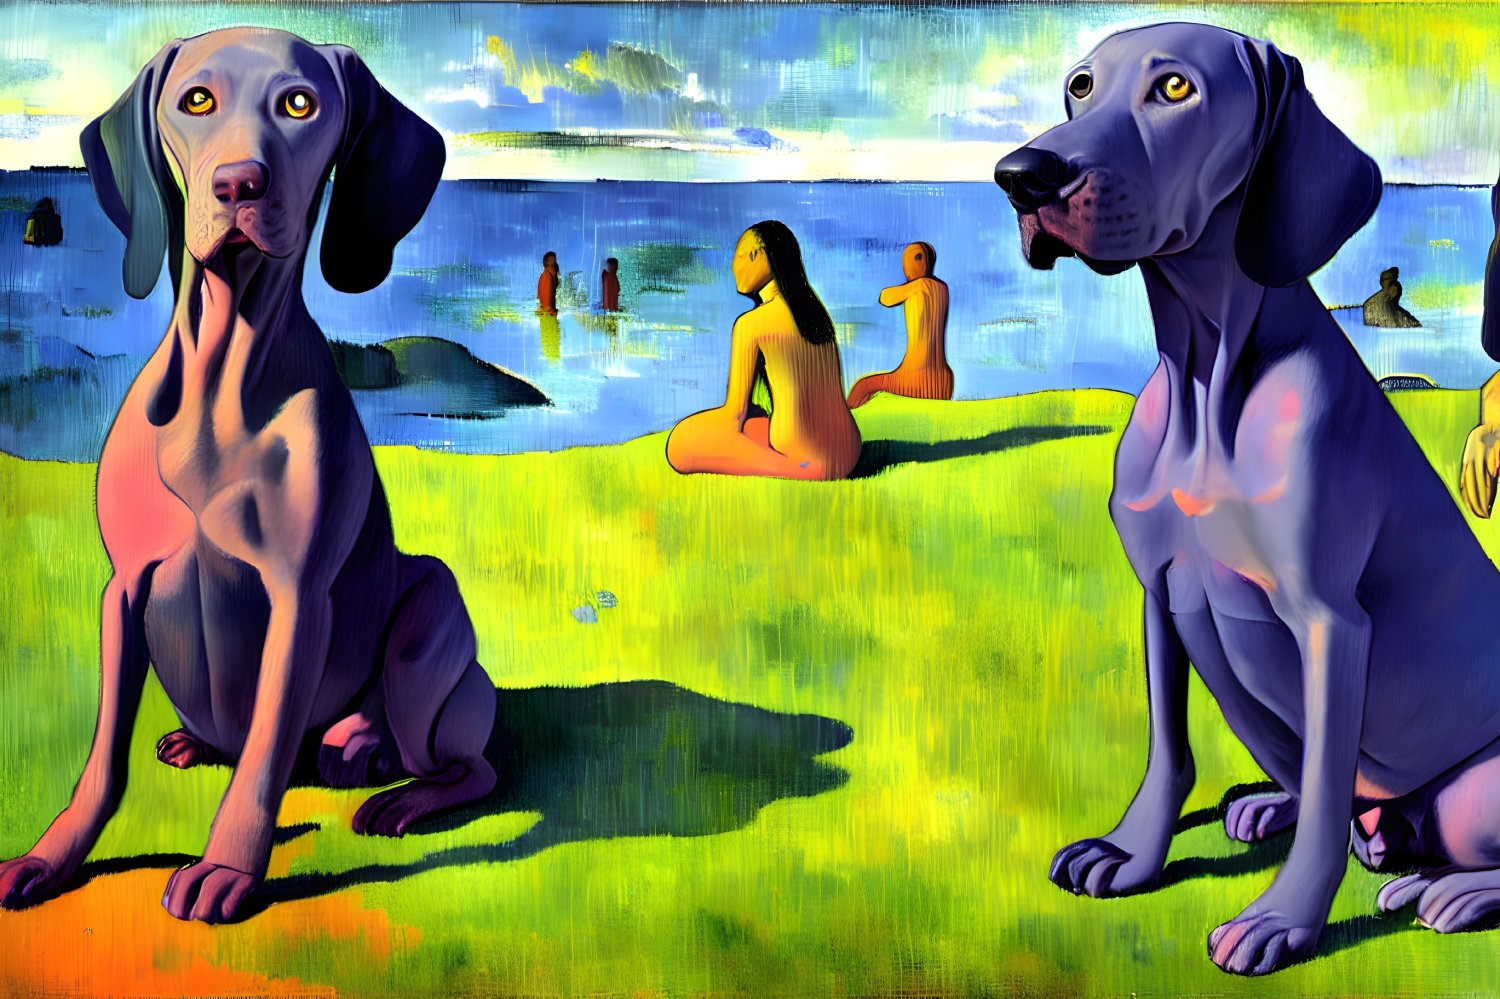 Illustrated Weimaraner dogs in colorful beach scene